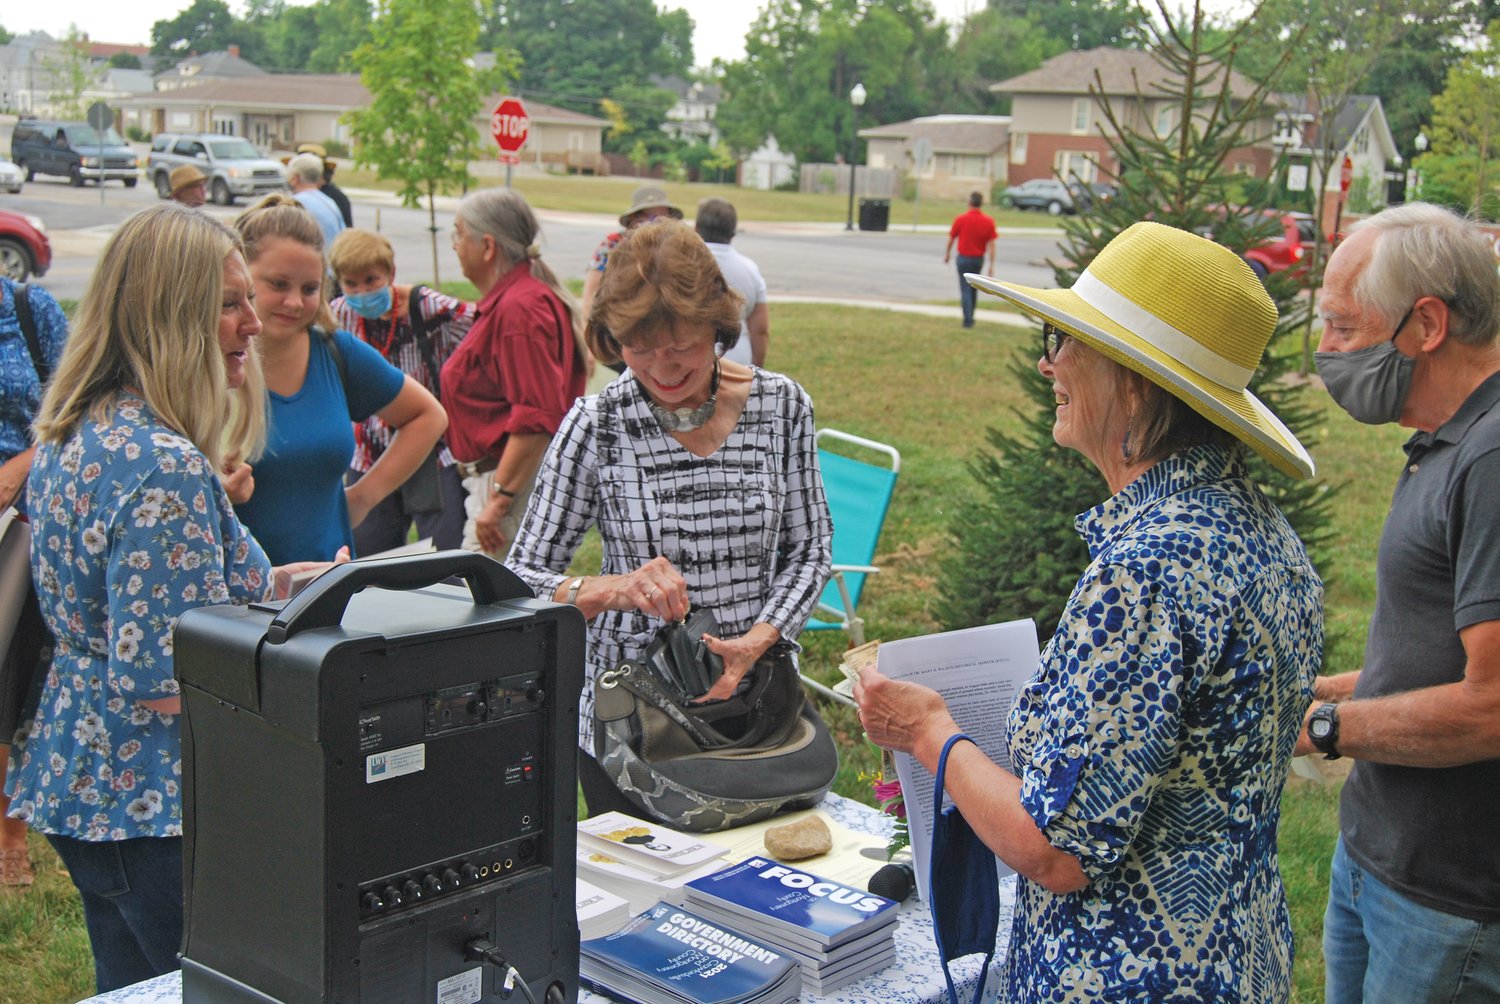 Paula Kochert, from left, Madeline Kochert and Nancy Gineris speak with Helen Hudson, president of the League of Women Voters of Montgomery County, and her husband Marc after the dedication of a plaque honoring pioneering physician and suffragist Dr. Mary Holloway Wilhite on Wednesday. Gineris and the Kocherts are descendants of Wilhite.